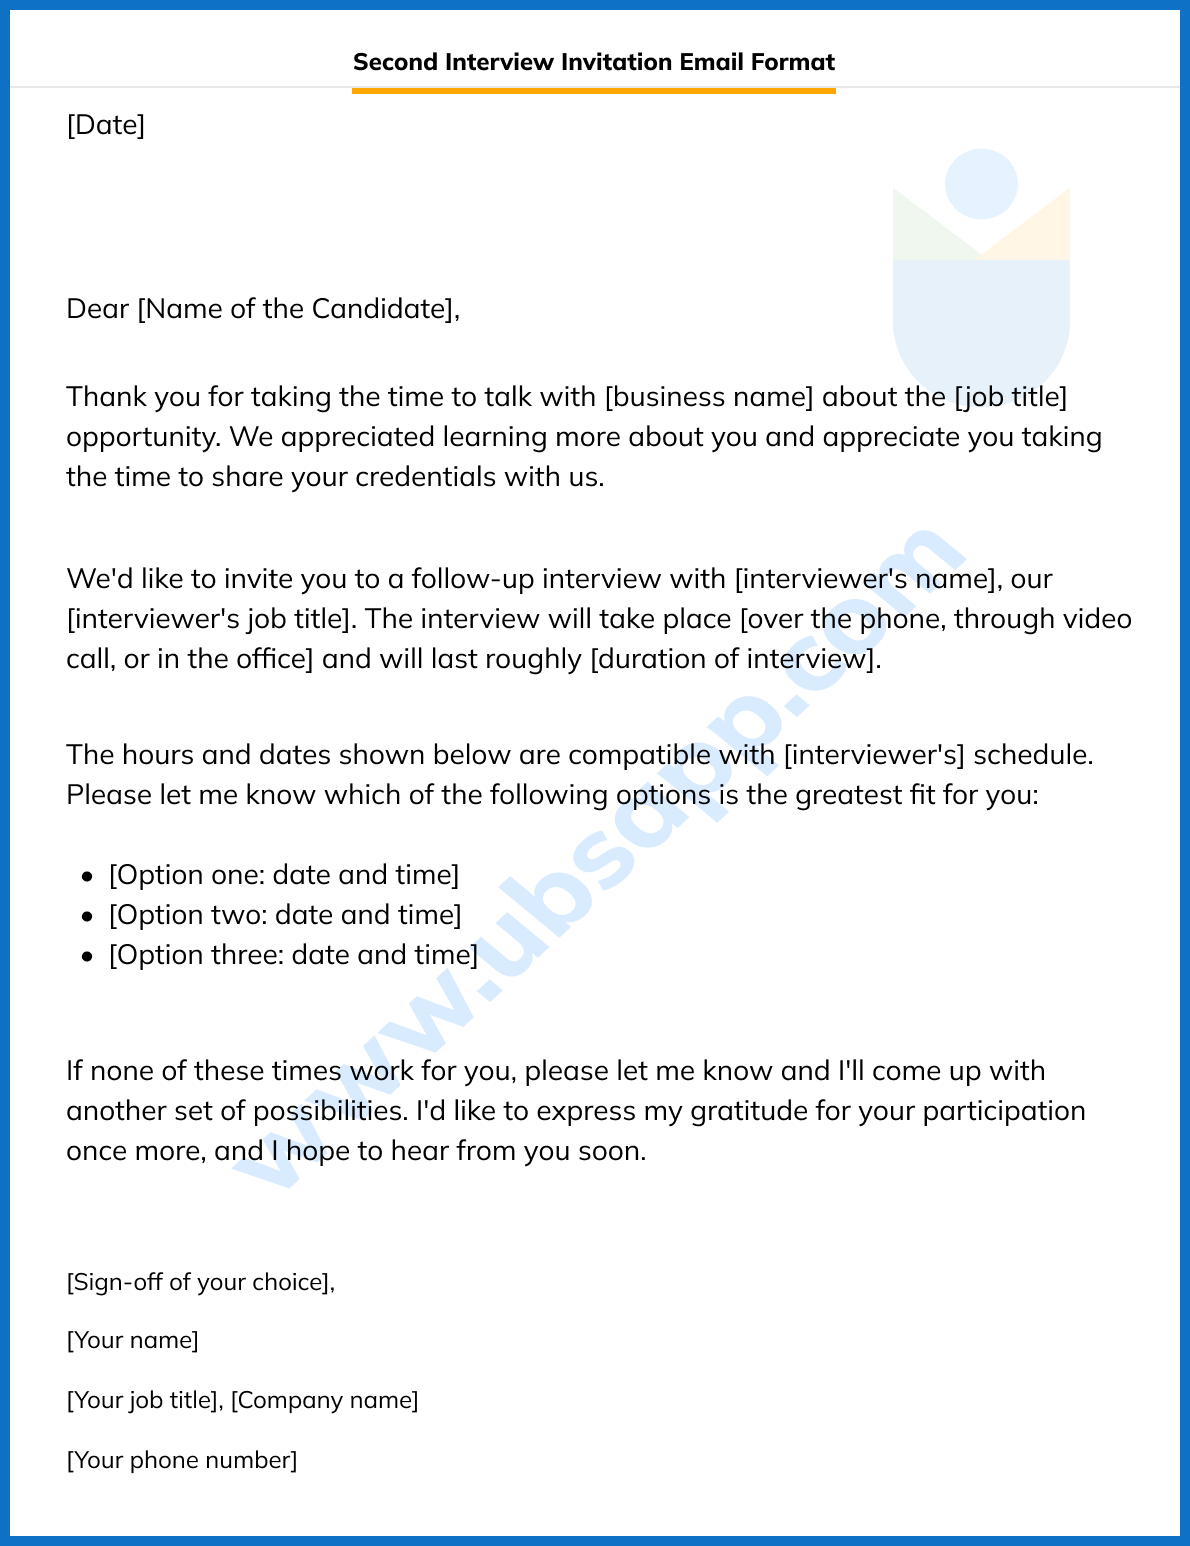 Second Interview Invitation Email Format